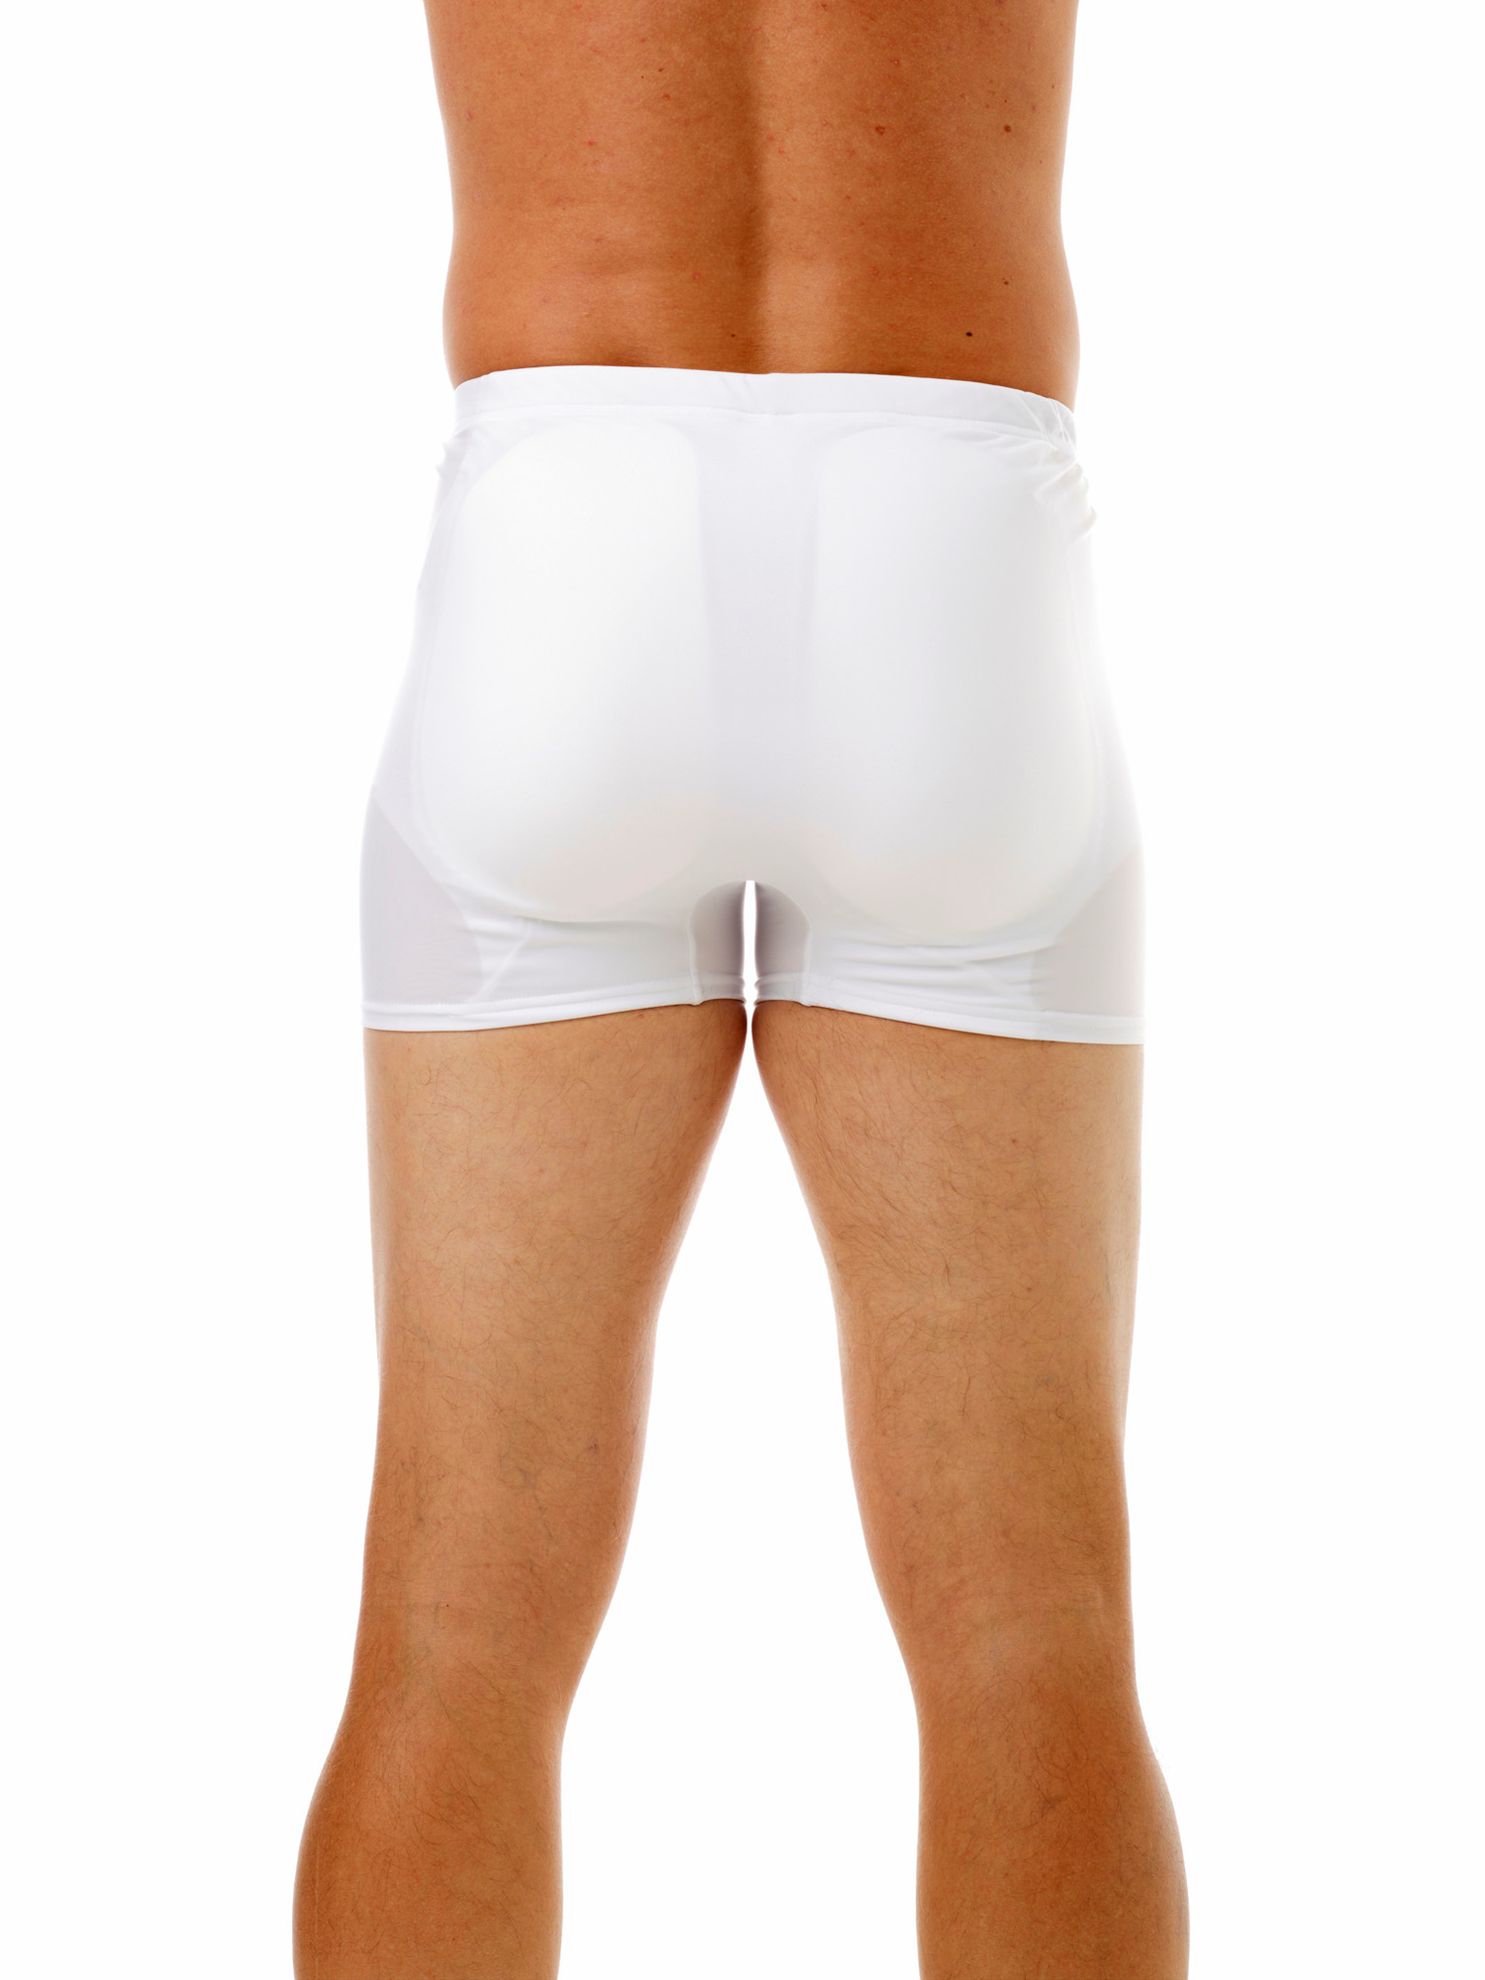 Padded Boxers. Men Compression Shirts, Girdles, Chest Binders, Hernia  Garments